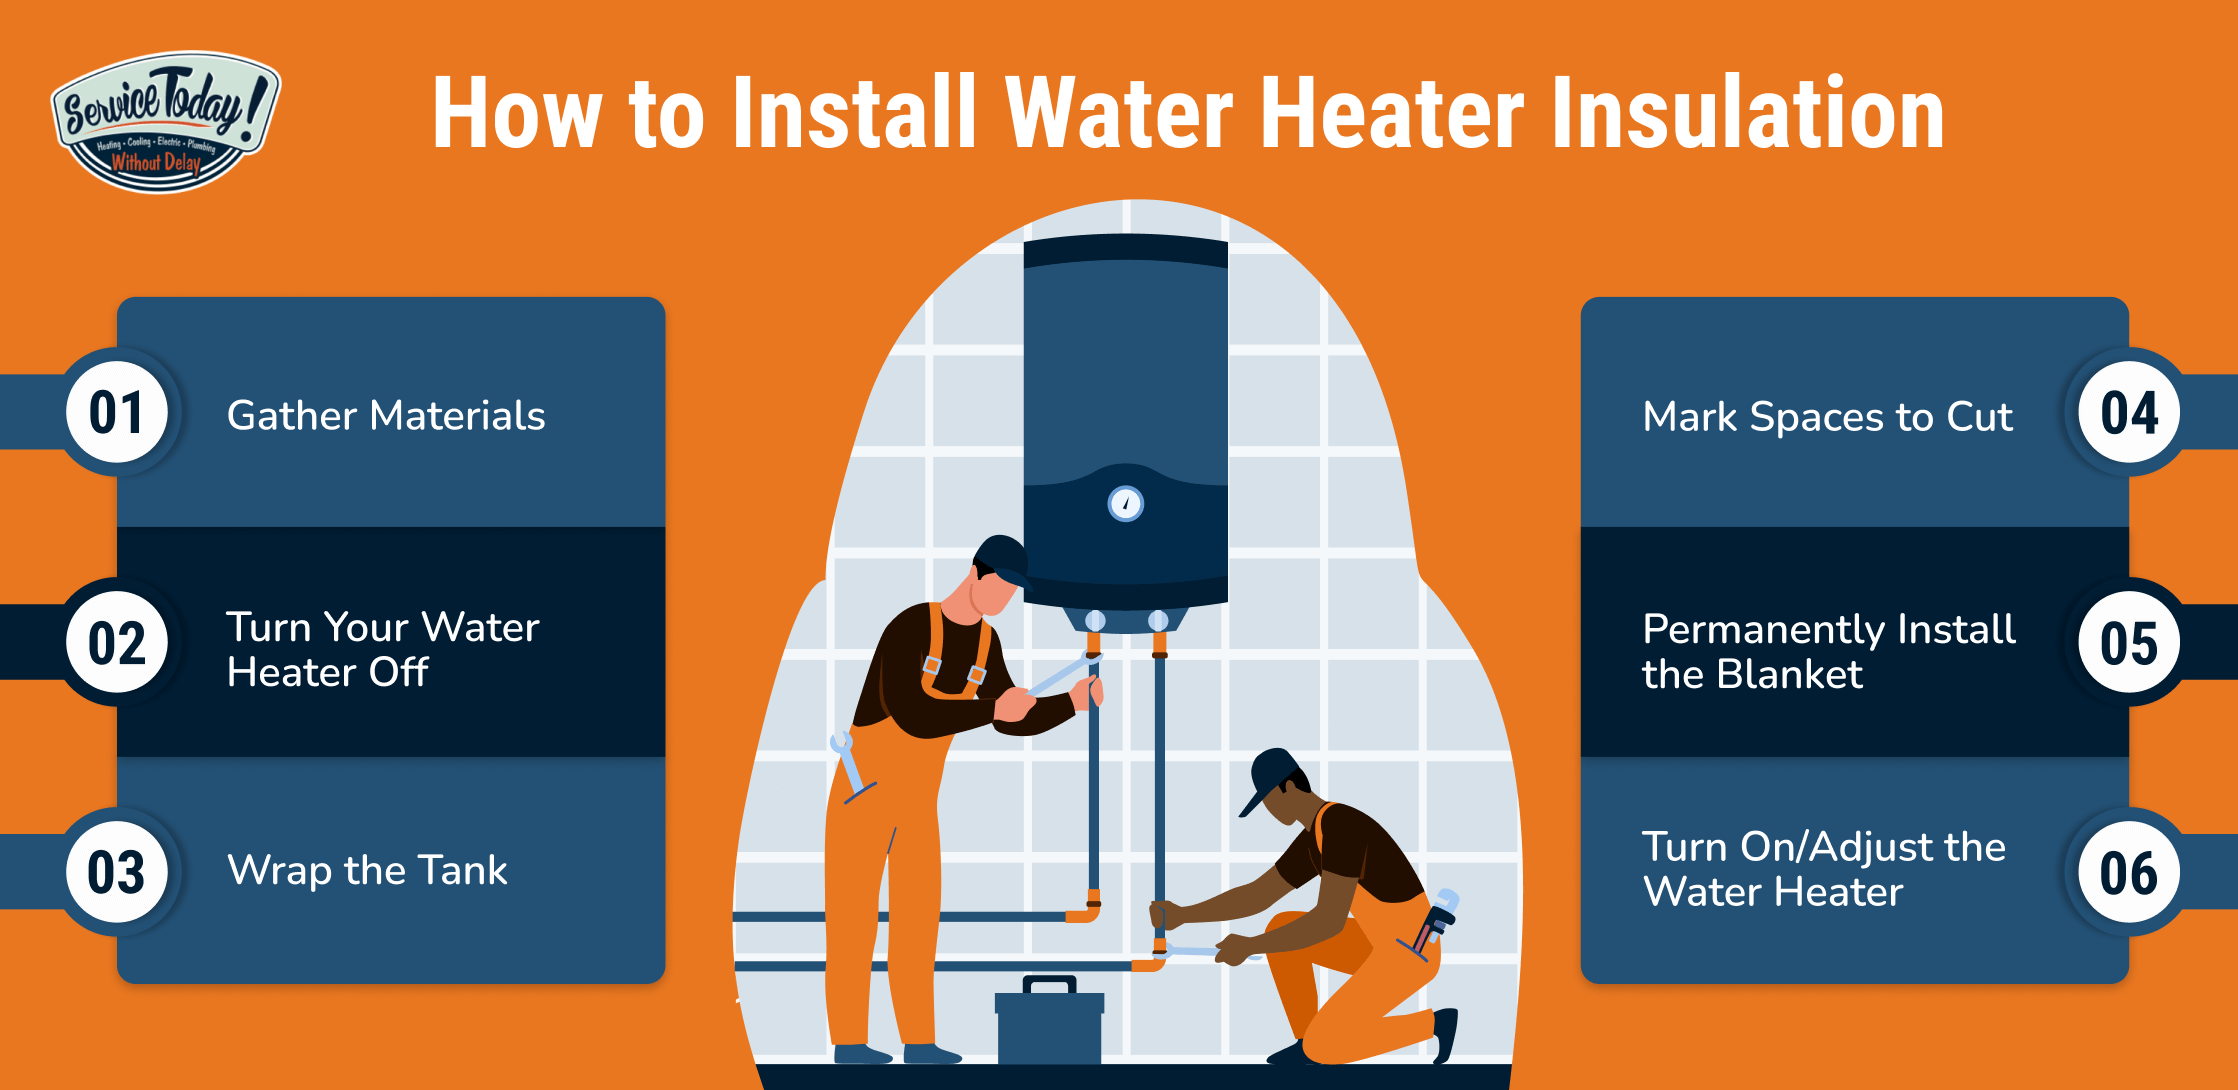 G.) Adjust water heater temp and install insulation blanket 